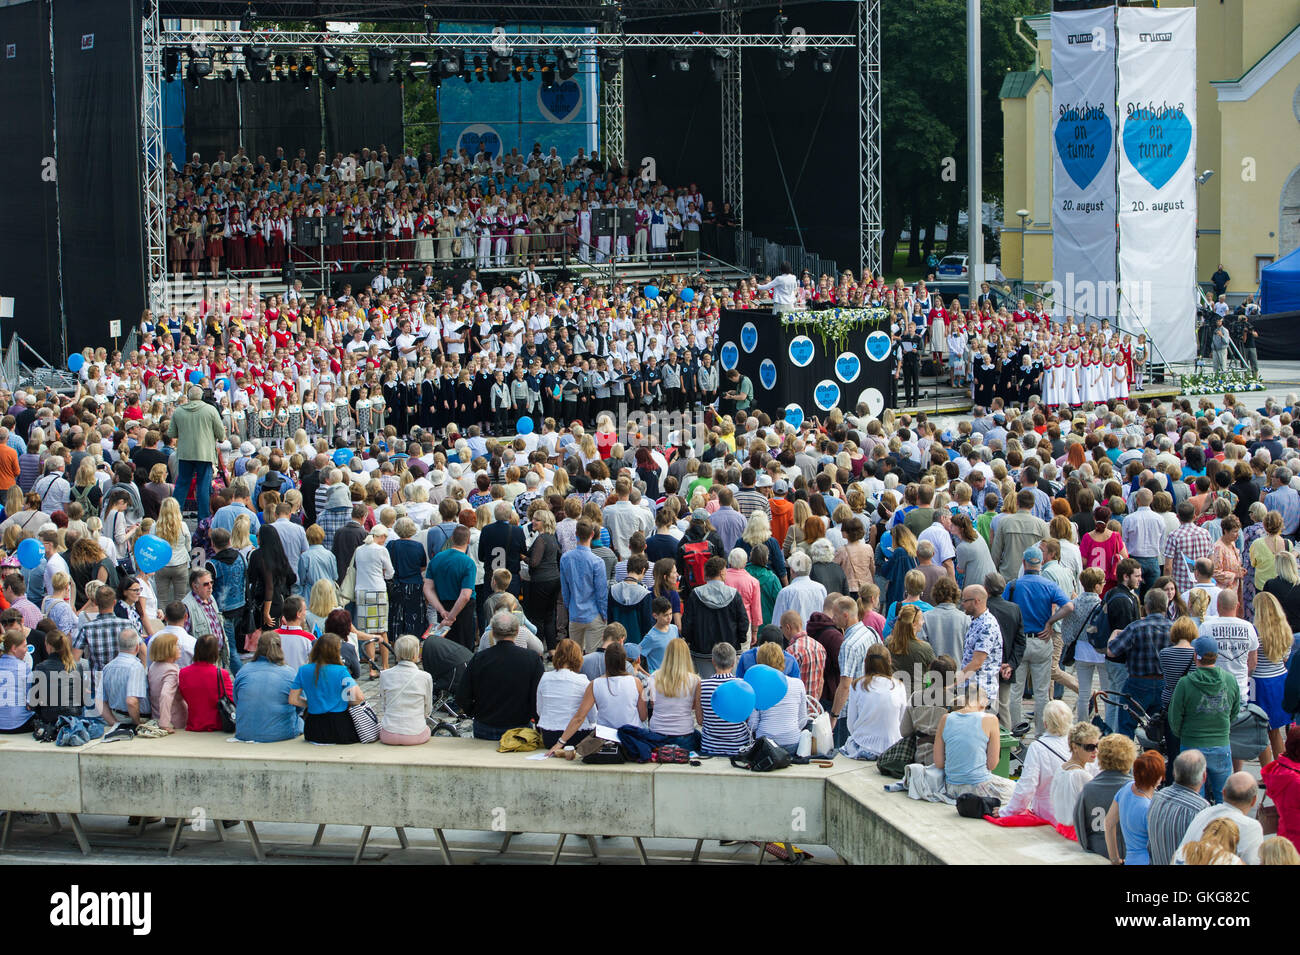 Tallinn, Estonia, 20th August 2016. Folkloric groups sing at the Freedom square of Tallinn. On 20th of August the Republic of Estonia celebrates the 25th years since the restoration of Independence after the collapse of the Soviet Union in 1991. Credit:  Nicolas Bouvy/Alamy Live News Stock Photo